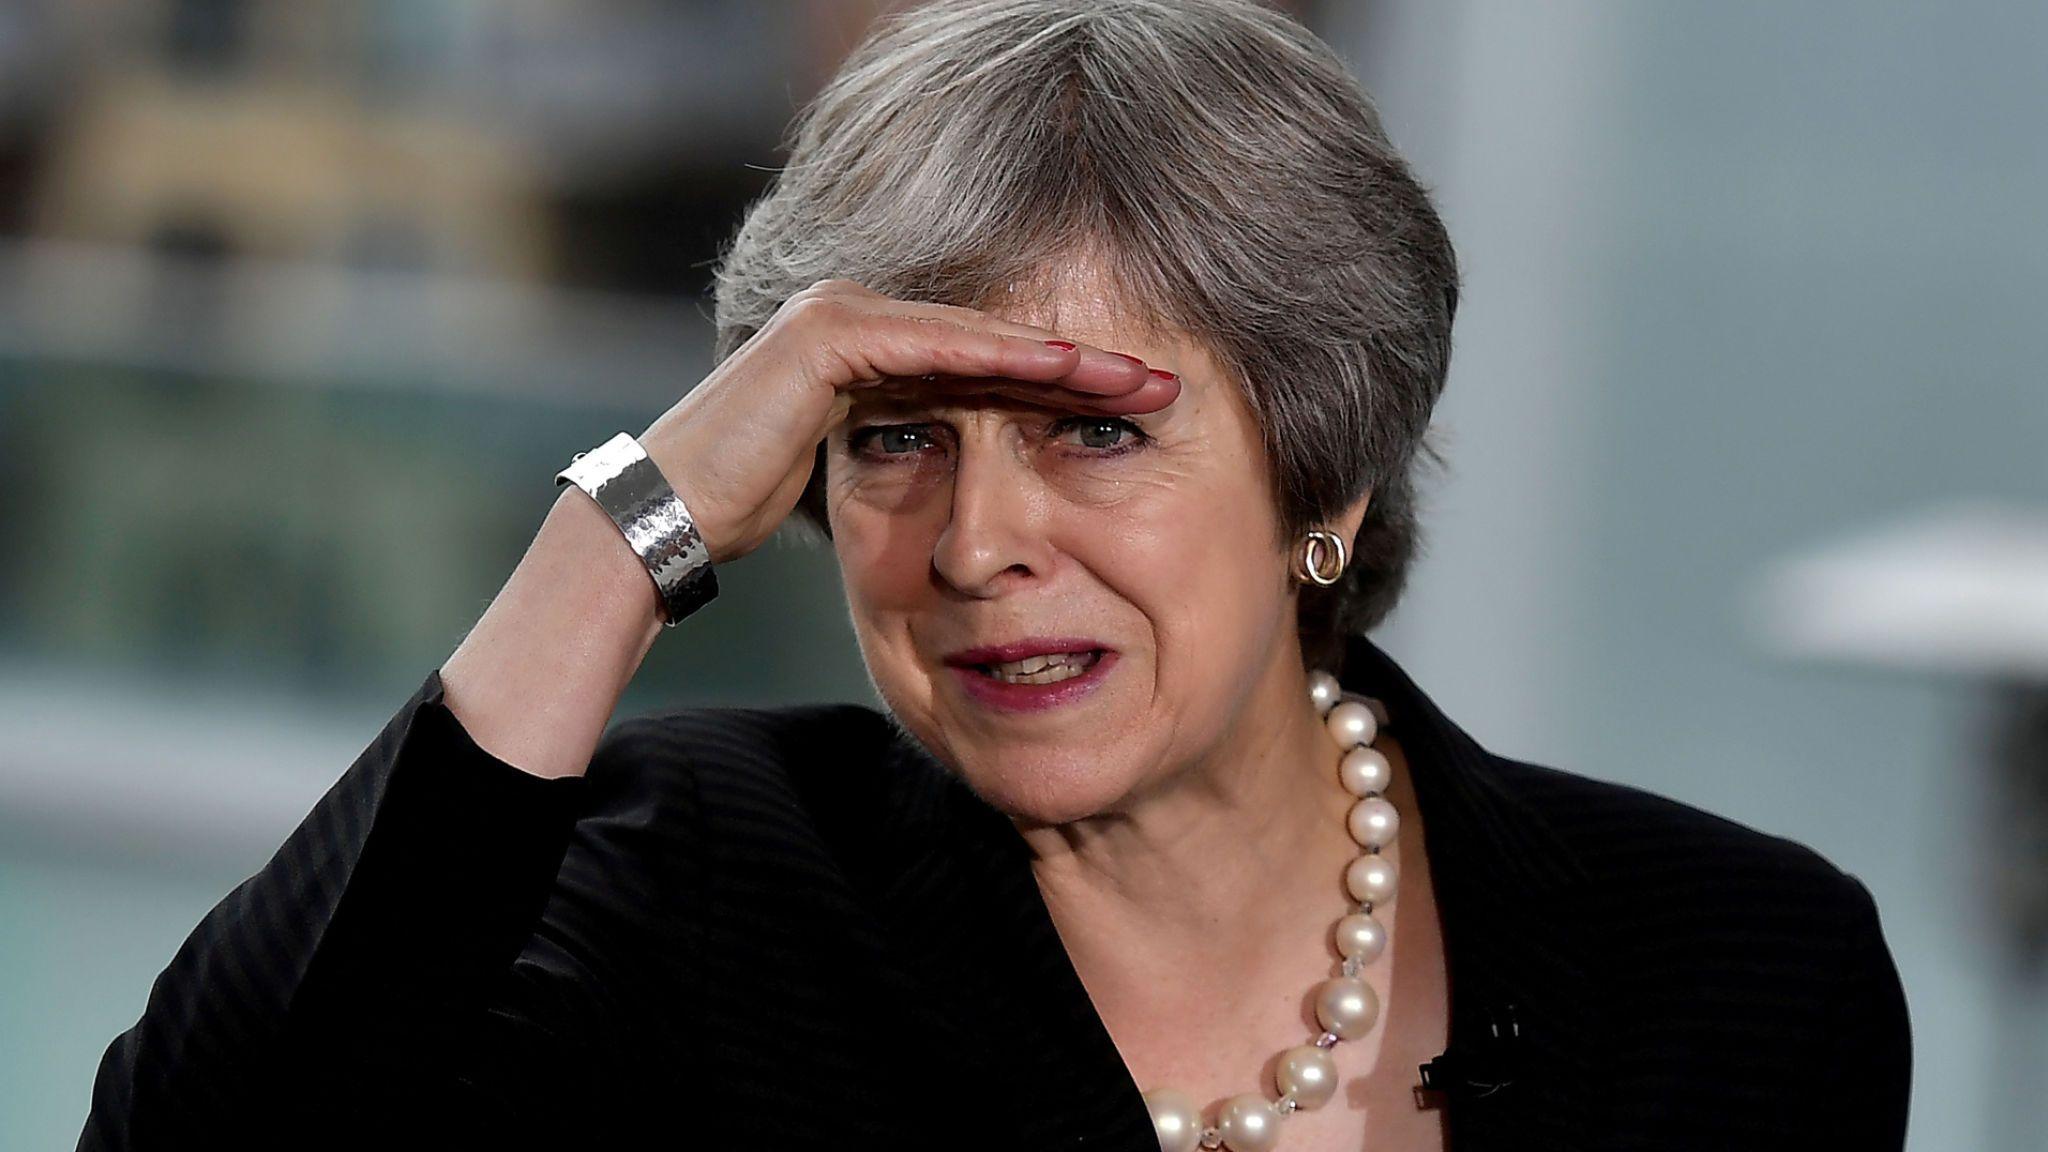 The tragedy of Theresa May David Cameron's mistake